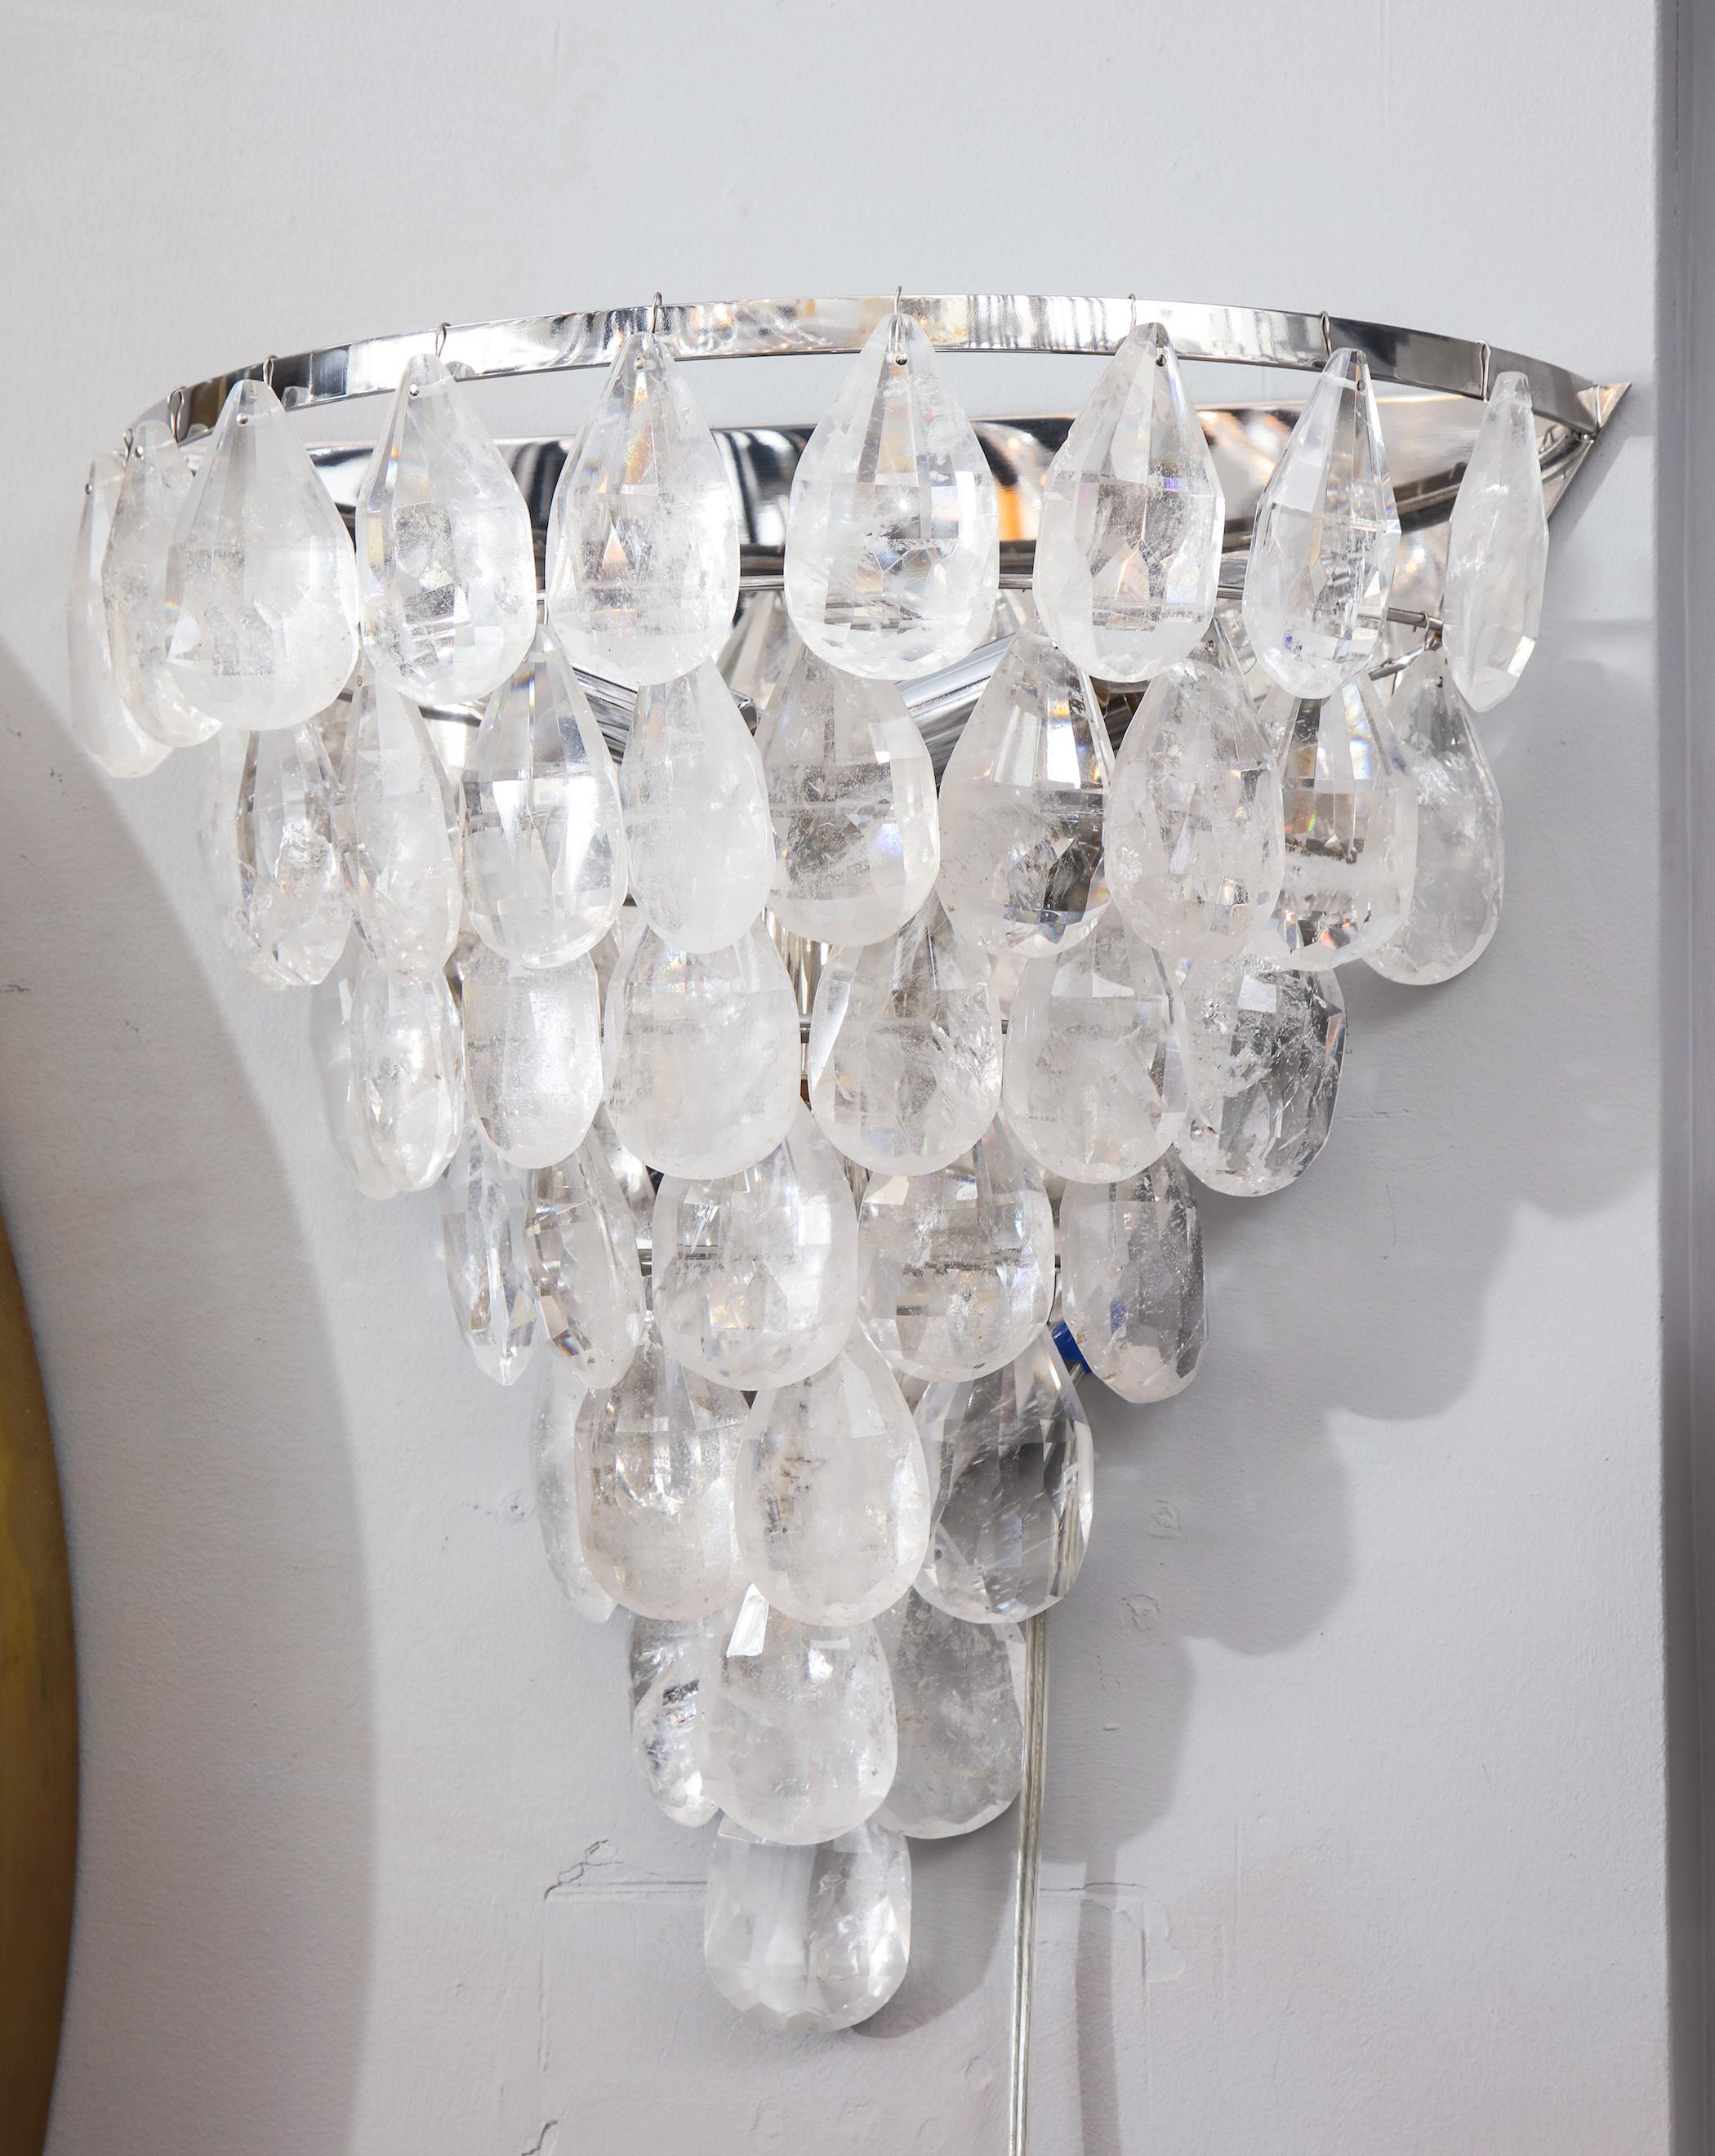 Glamorous single rock crystal cascading sconce in polished nickel finish. Customization is available in different sizes and finishes.